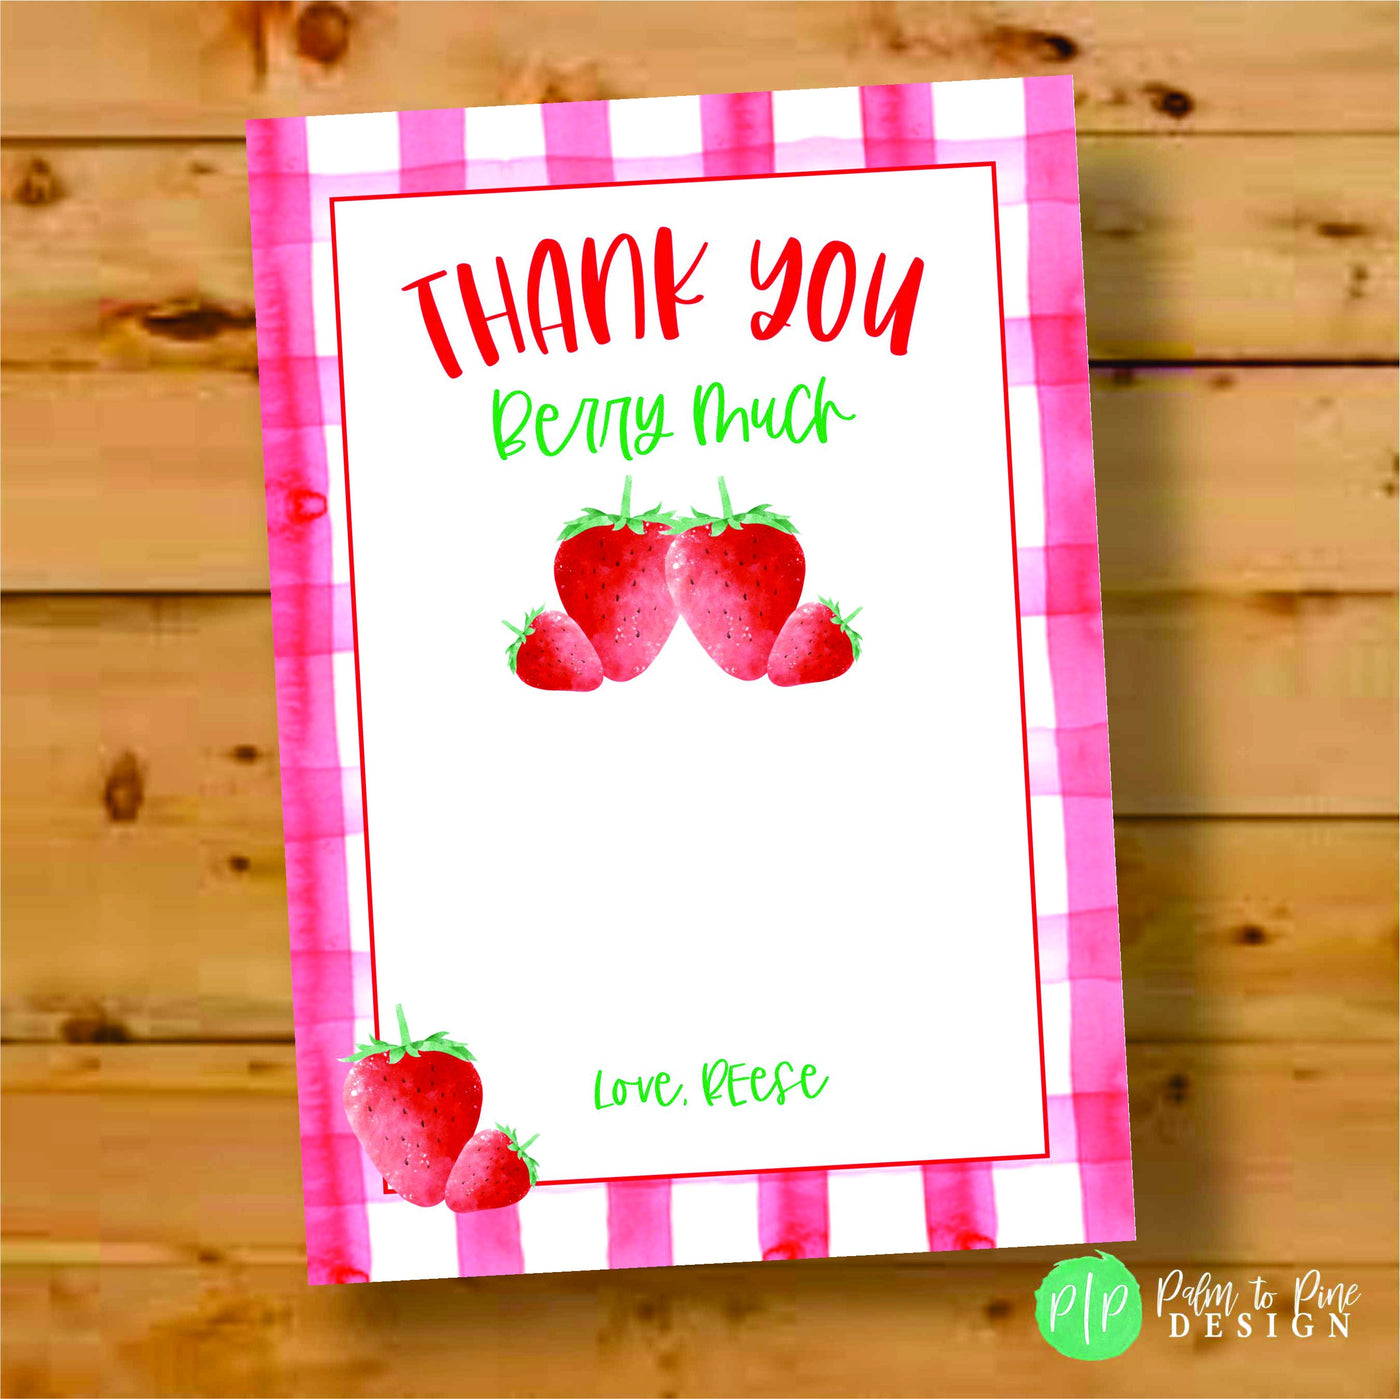 Strawberry Birthday Thank You Card, Berry Sweet Birthday, Berry Birthday Thank You Card, Strawberry Shortcake Thank you, gingham, watercolor